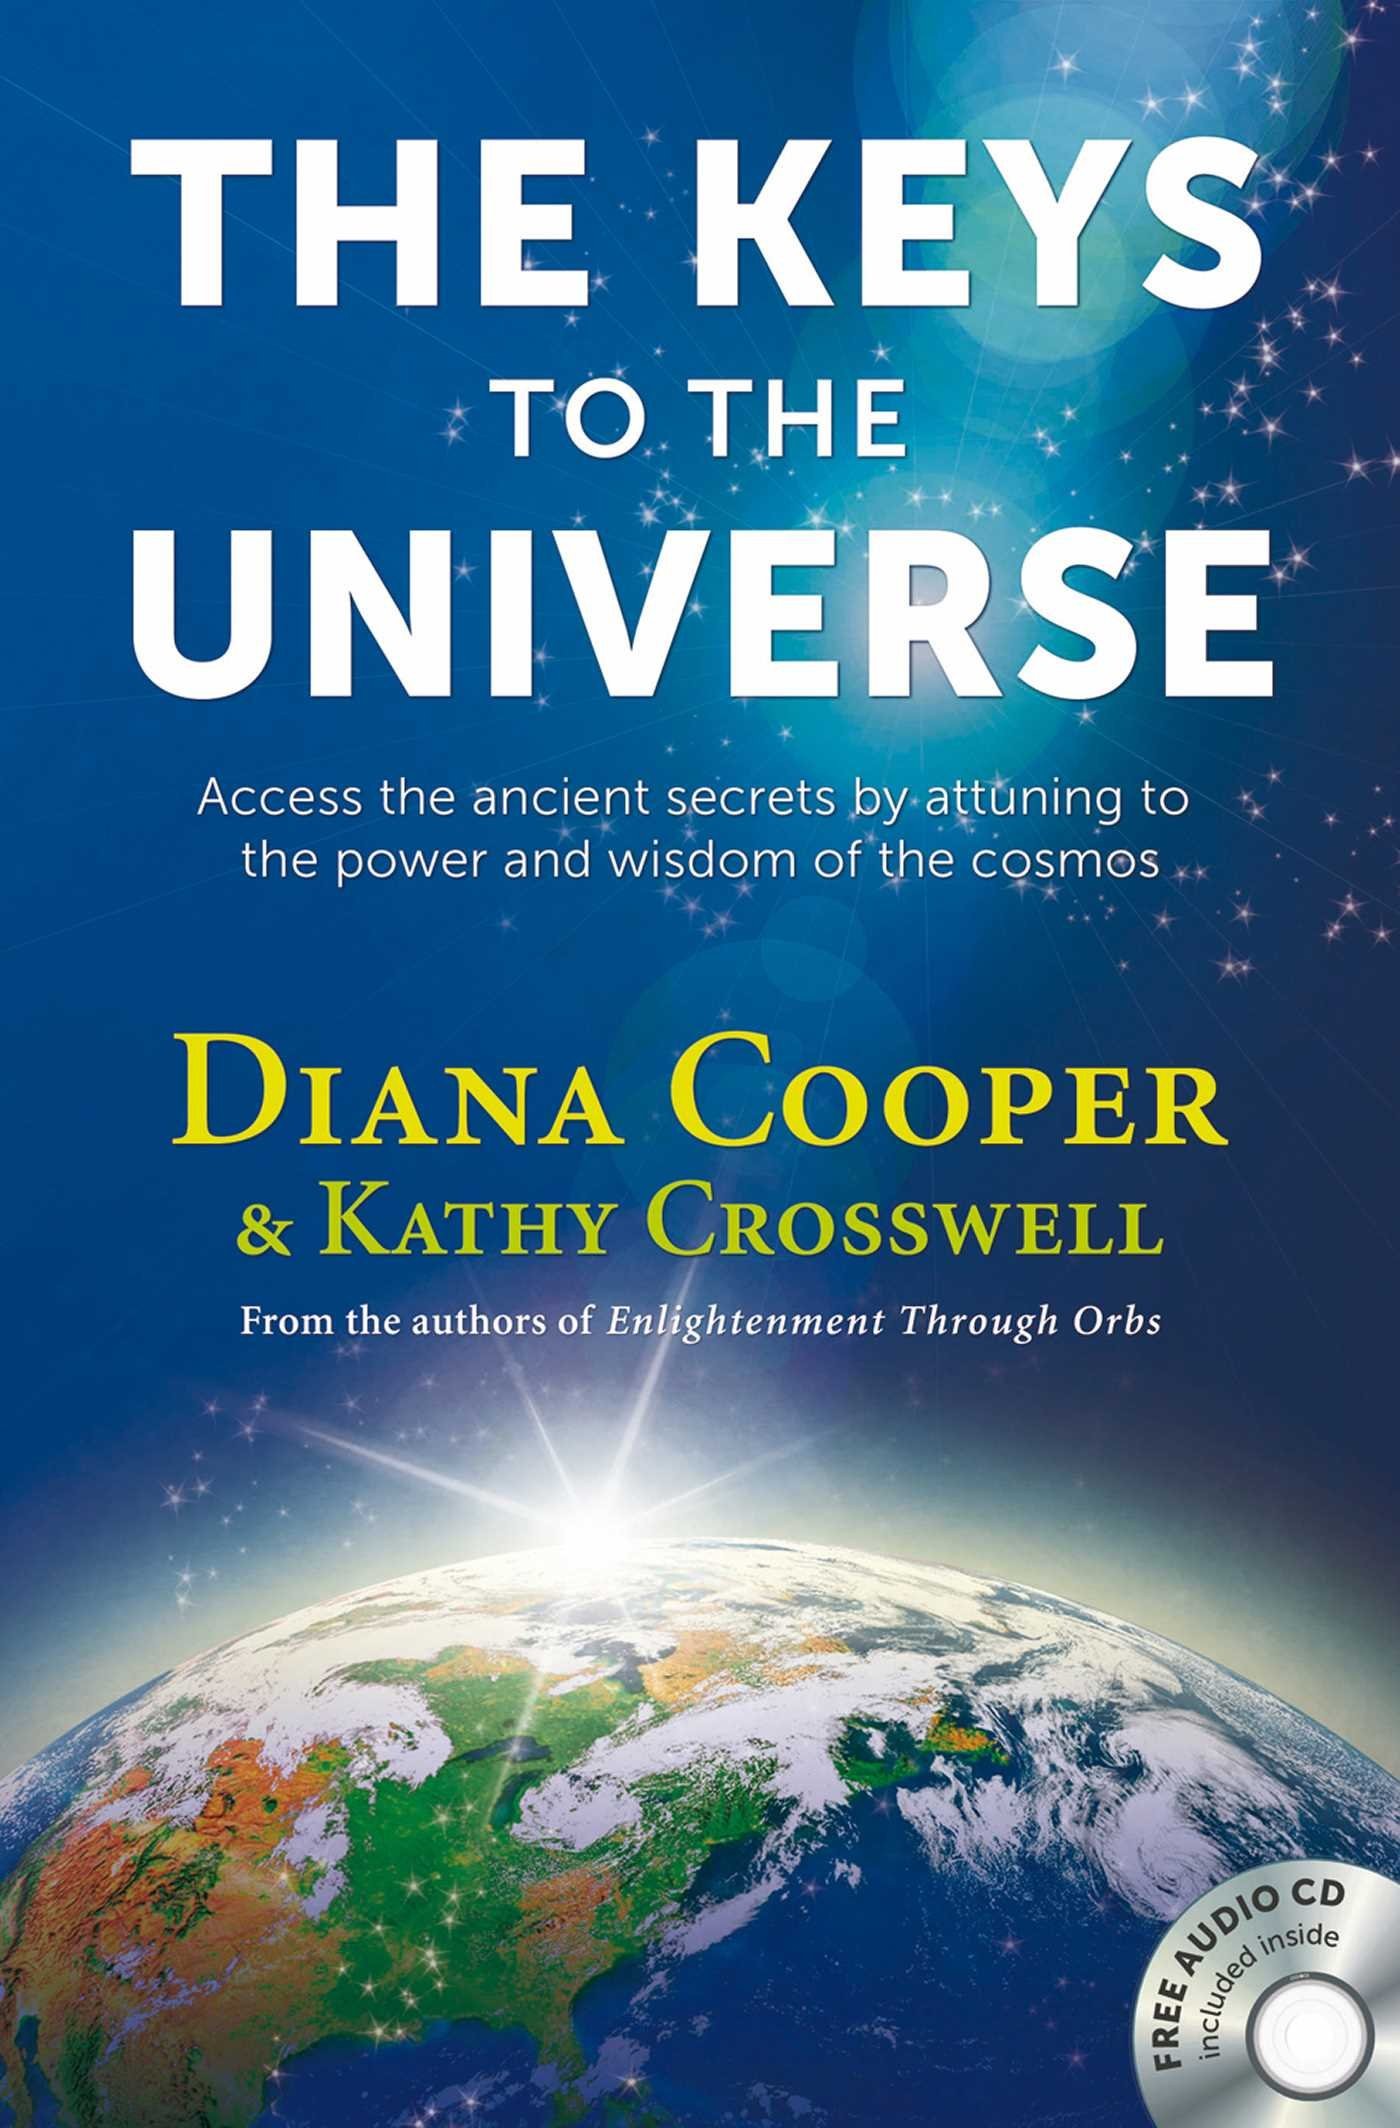 The Keys to the Universe: Access the Ancient Secrets by Attuning to the Power and Wisdom of the Cosmos